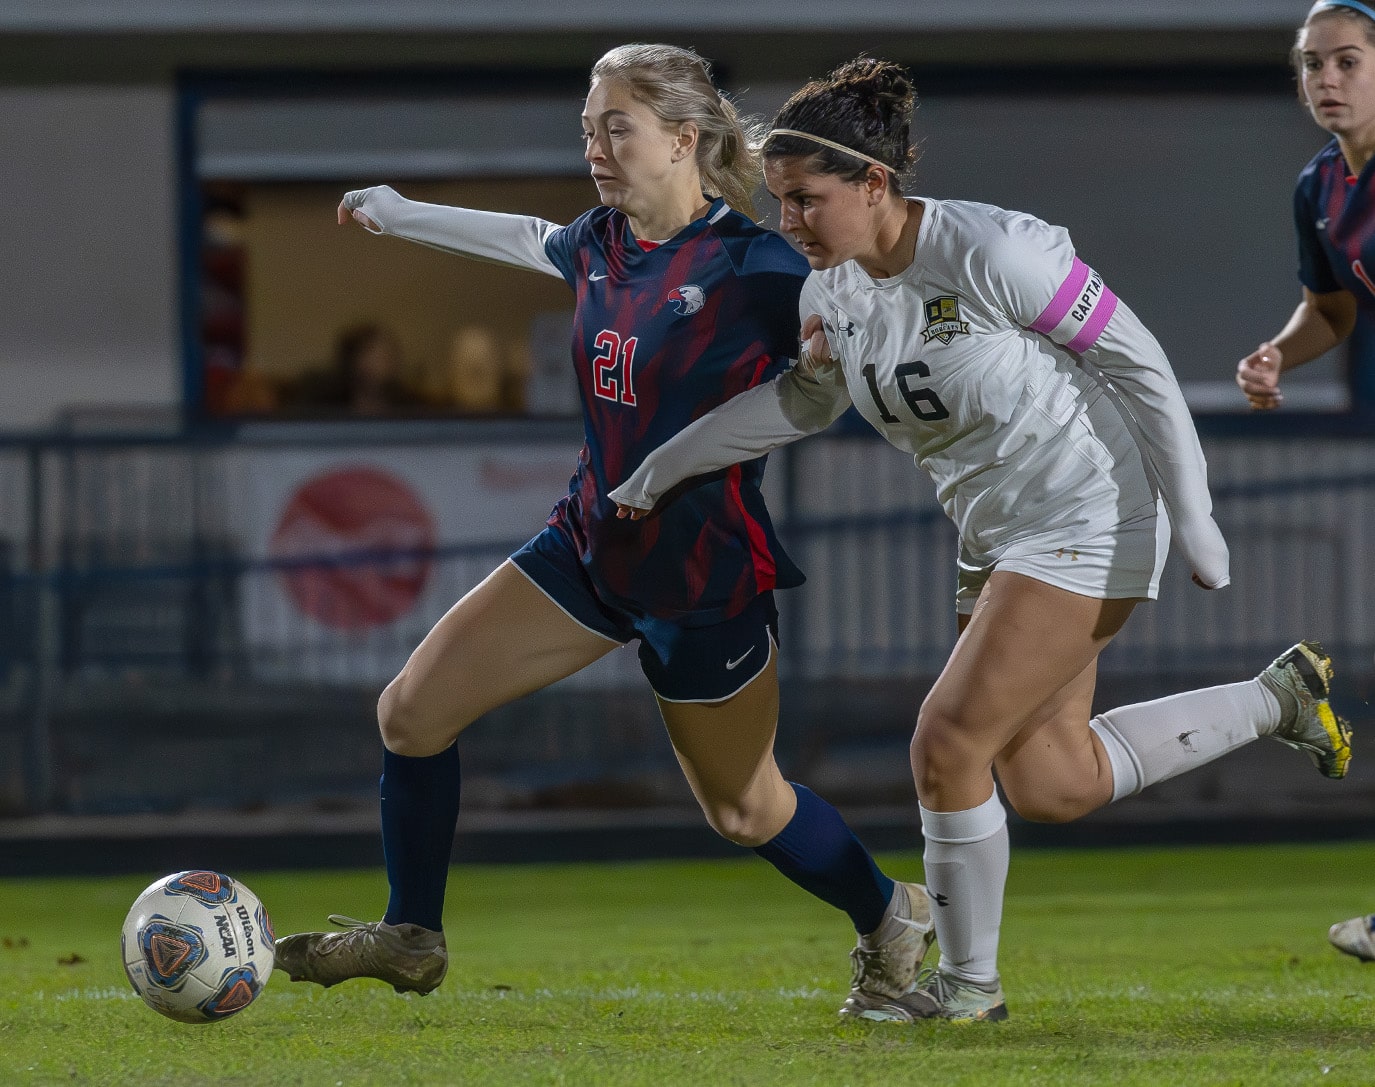 Springstead High, 21, Sarah Frazer works to get by Buchholz High defender, 16, Olivia Frazer in the 6A District 4 semi-final game in Spring Hill. [Photo by Joe DiCristofalo]